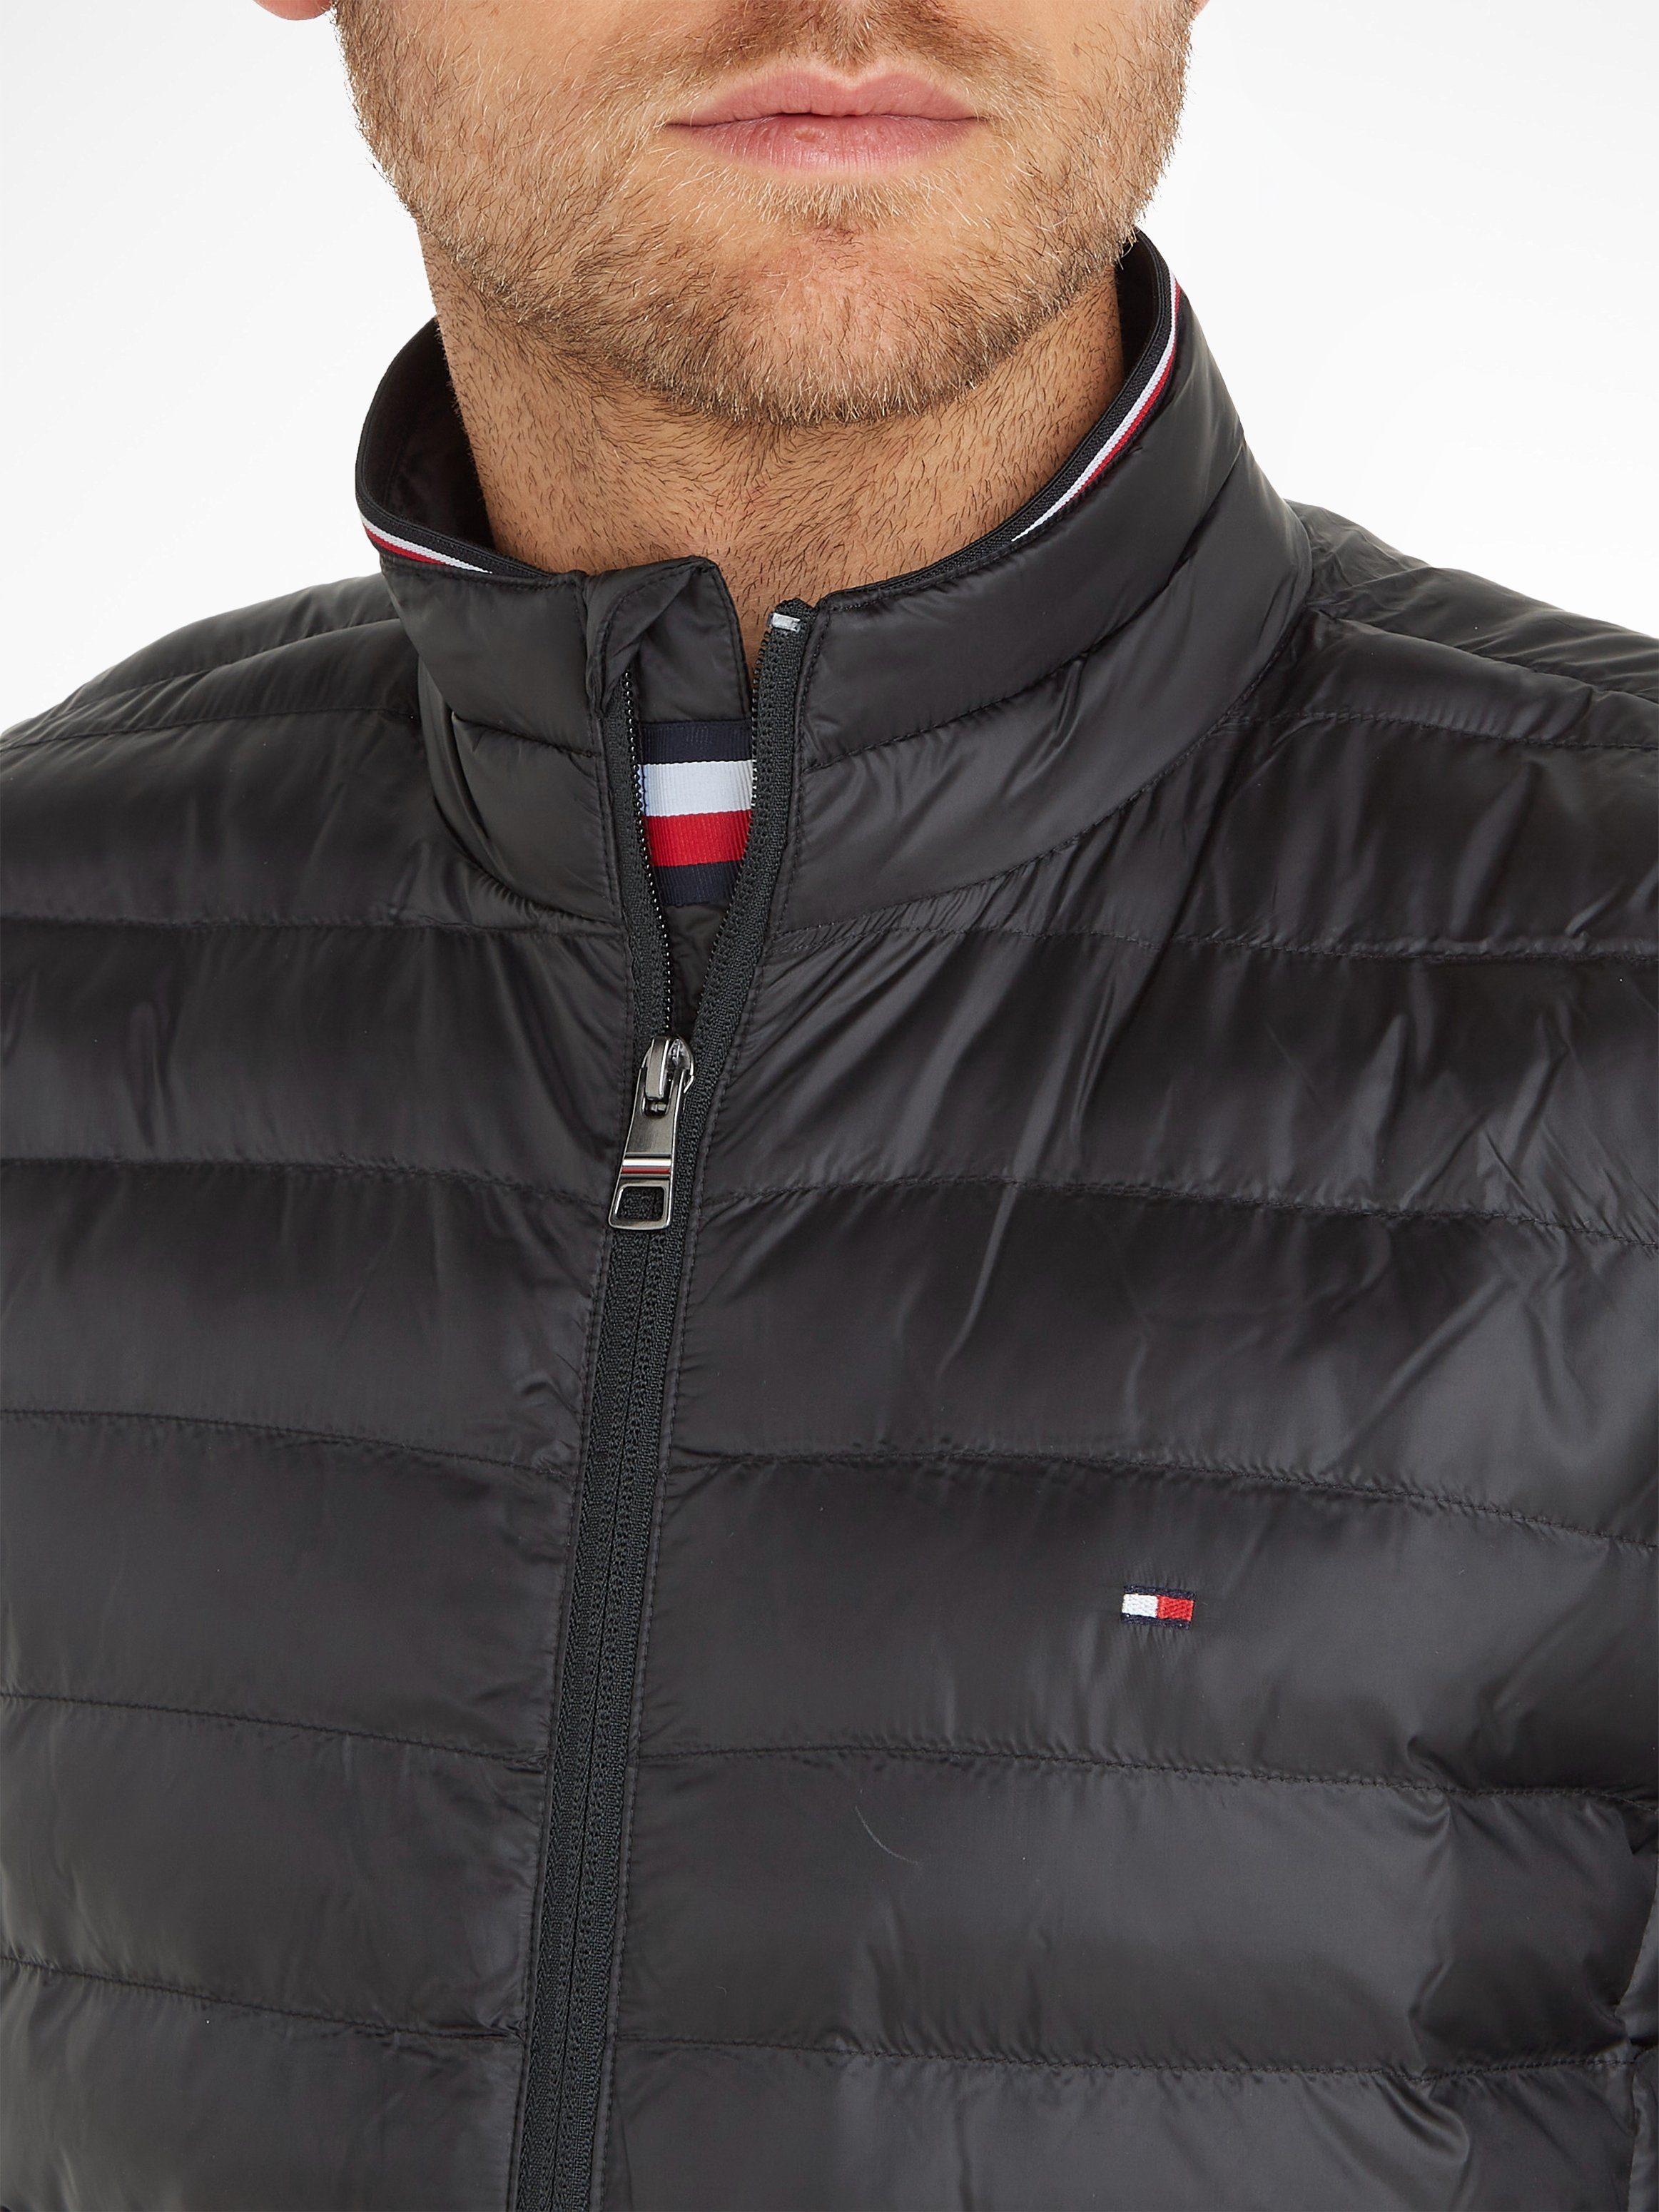 Tommy Hilfiger Steppjacke CORE black RECYCLED JACKET PACKABLE